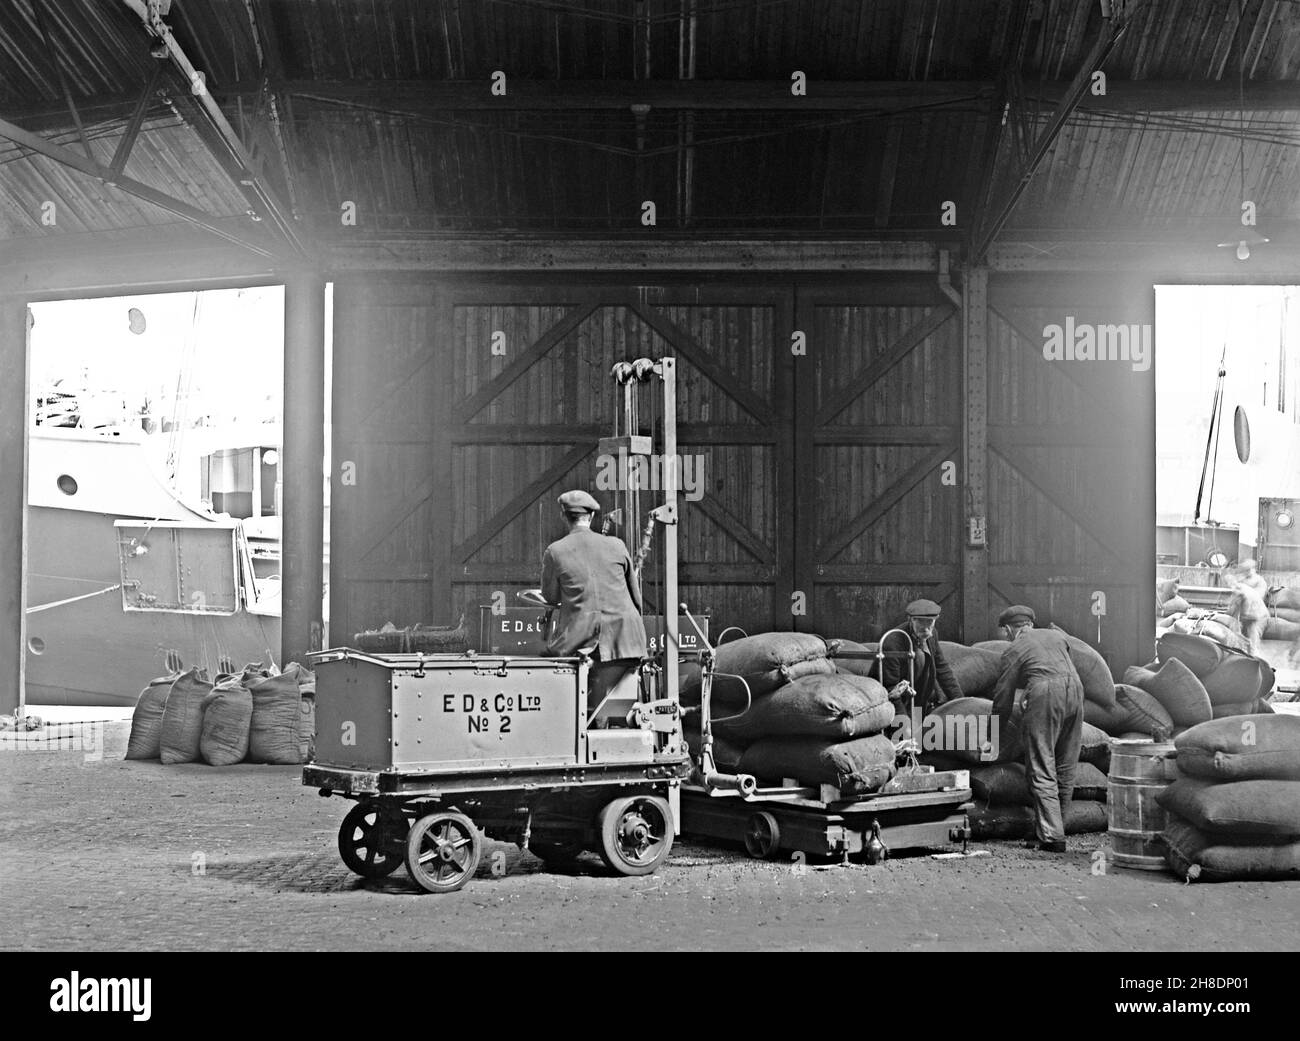 Early battery powered transport – here a forklift truck is being used to lift sacks on to a mobile weighing machine at E D and Co Ltd, a shipping and warehousing company at Liverpool Docks, Lancashire, England, UK in the early years of the twentieth century. In the early years of motor transport electrically-powered vehicles were a good option compared with petrol driven ones for short-distance commercial transport, such as moving goods around factories. This is taken from an old original glass negative – a vintage 20th century photograph. Stock Photo